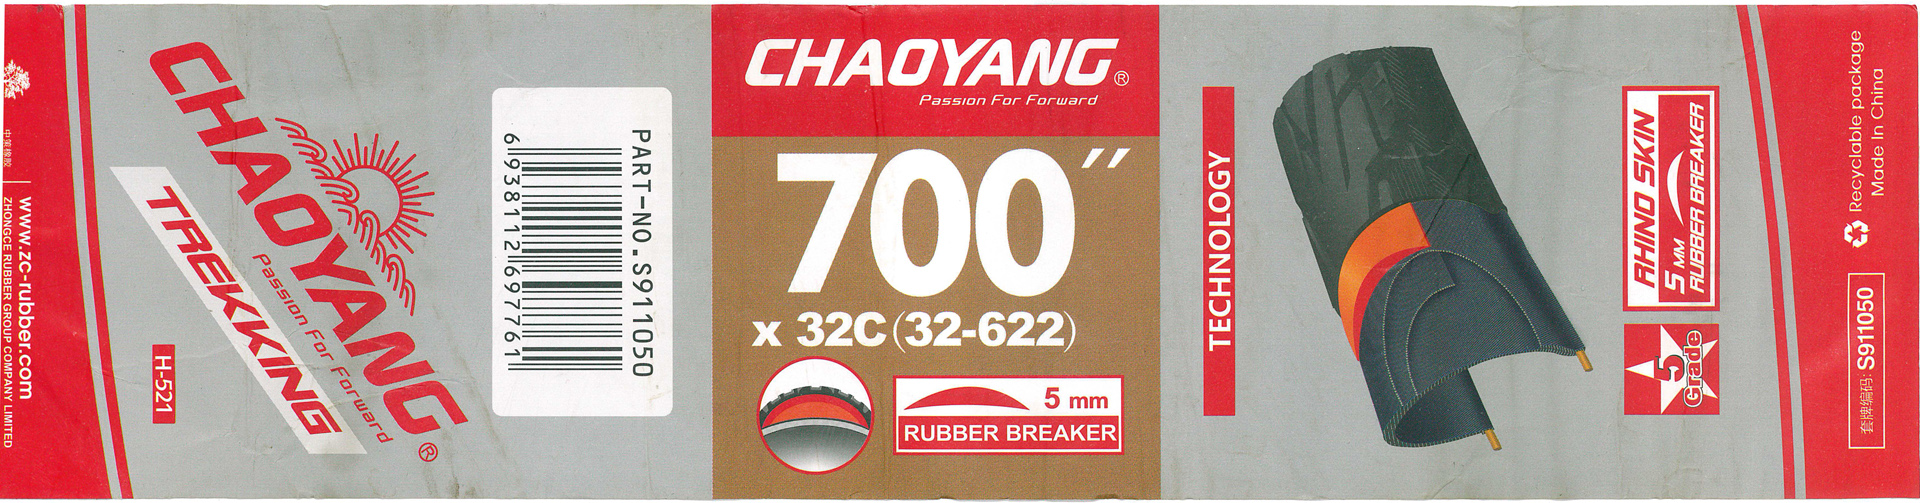 Chao Yang 700x32C (32-622) H-521 scan small